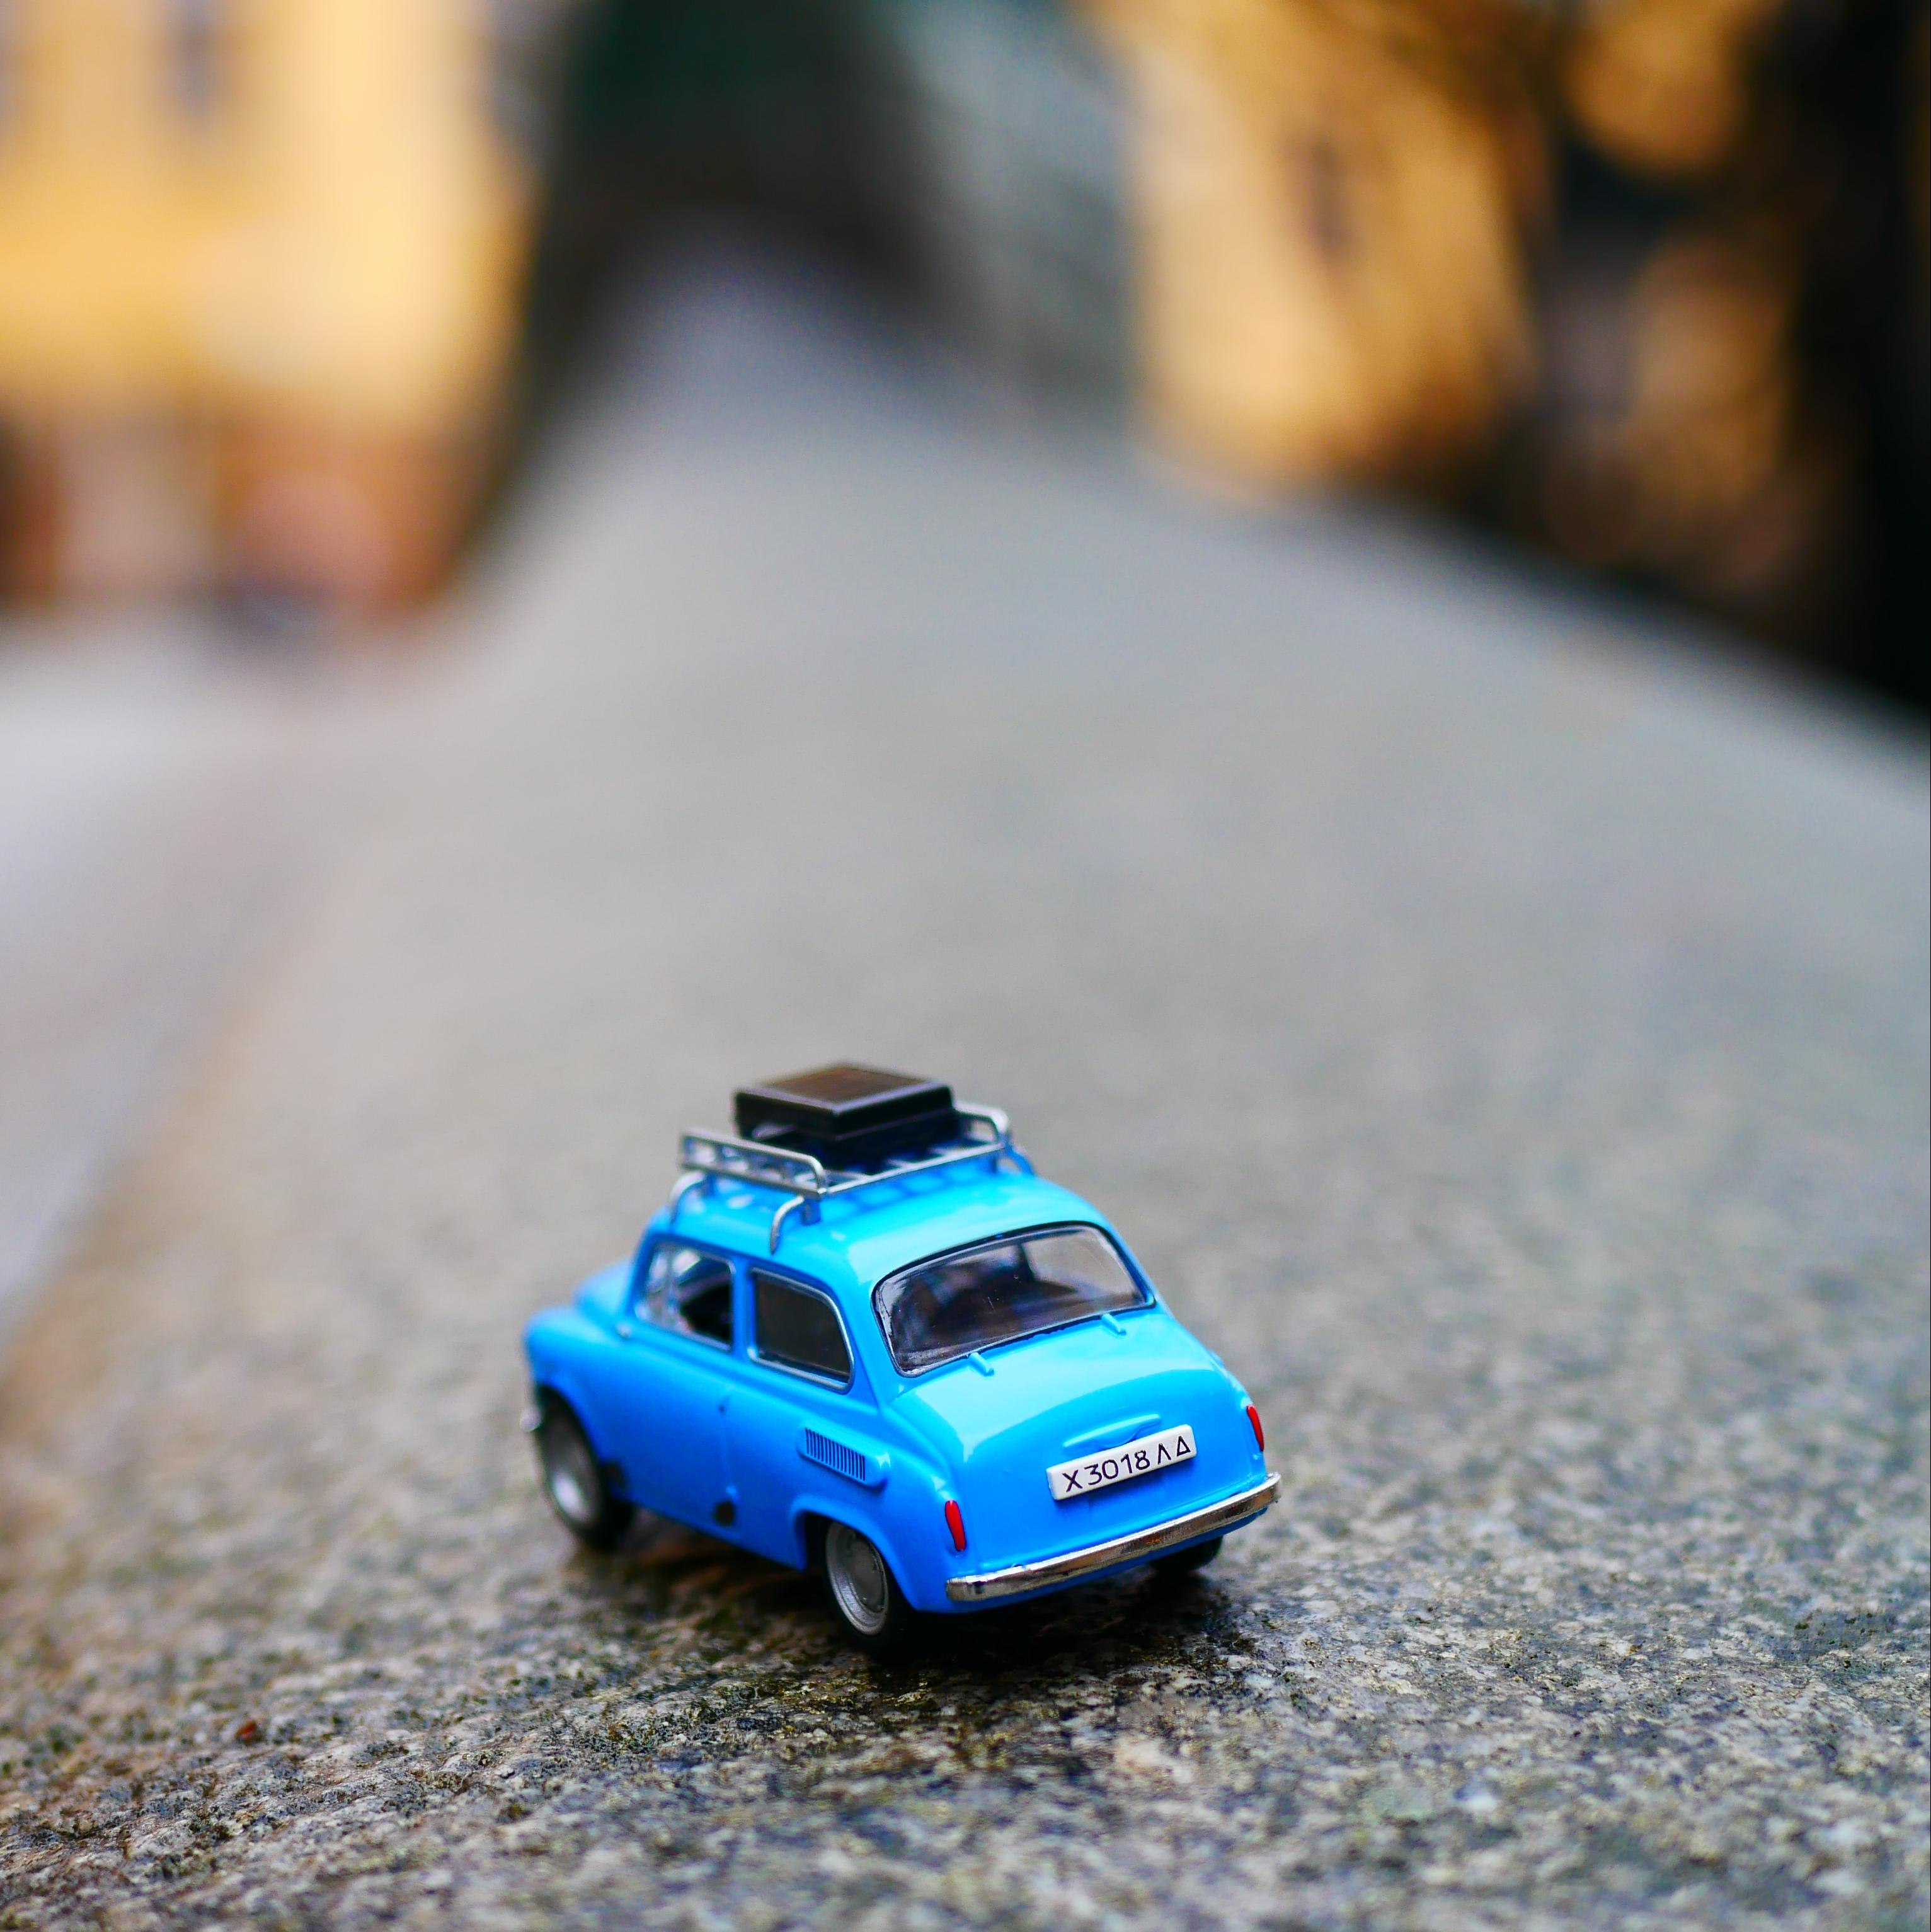 Blue toy car on road with blurred background